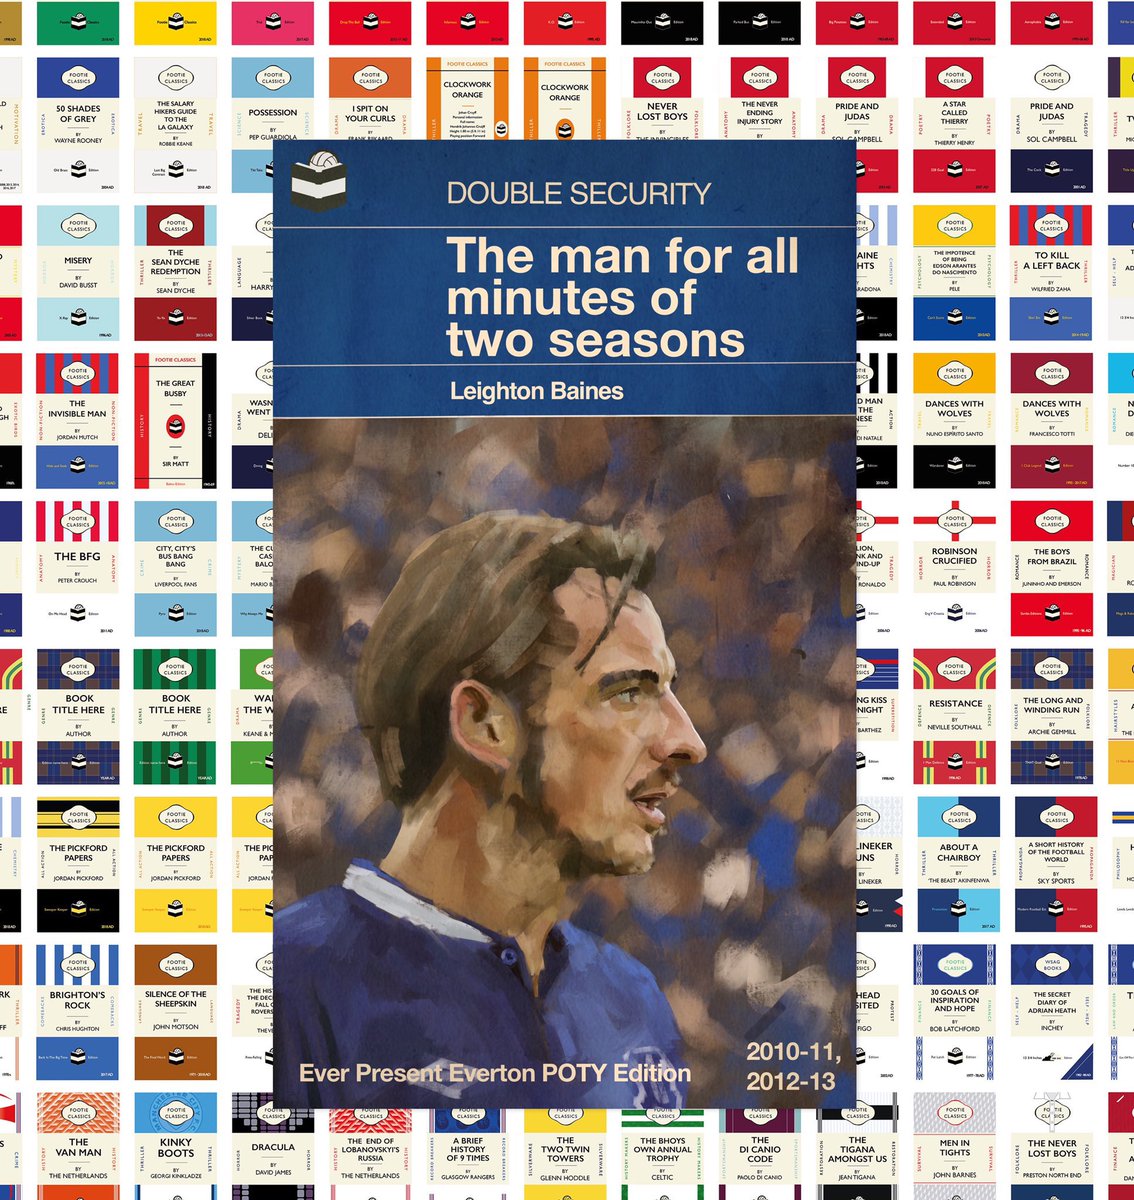 THE MAN FOR ALL MINUTES OF TWO SEASONS - A footie classic about a huge presence in the #Everton team. Leighton played in every minute of 2 different seasons and was twice crowned Everton’s POTY. #EFC #UTFT #legend #LeightonBaines